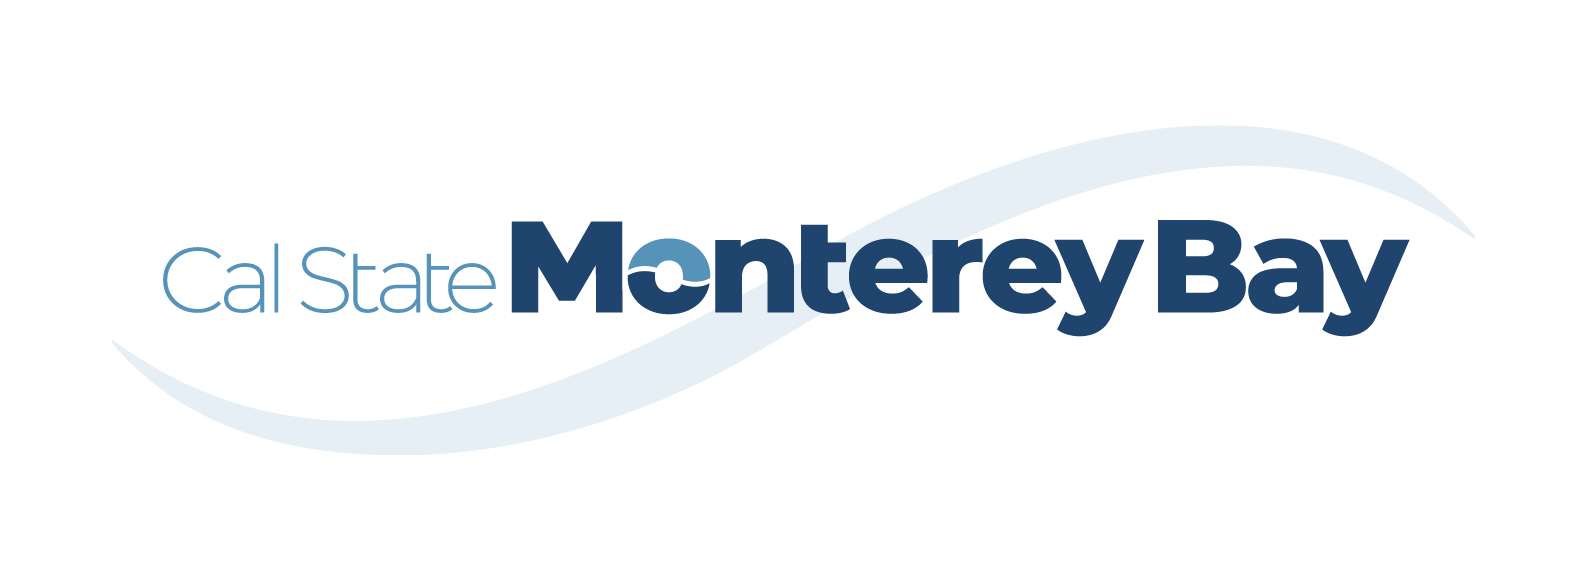 Cal State Monterey Bay Logo with rearranged elements